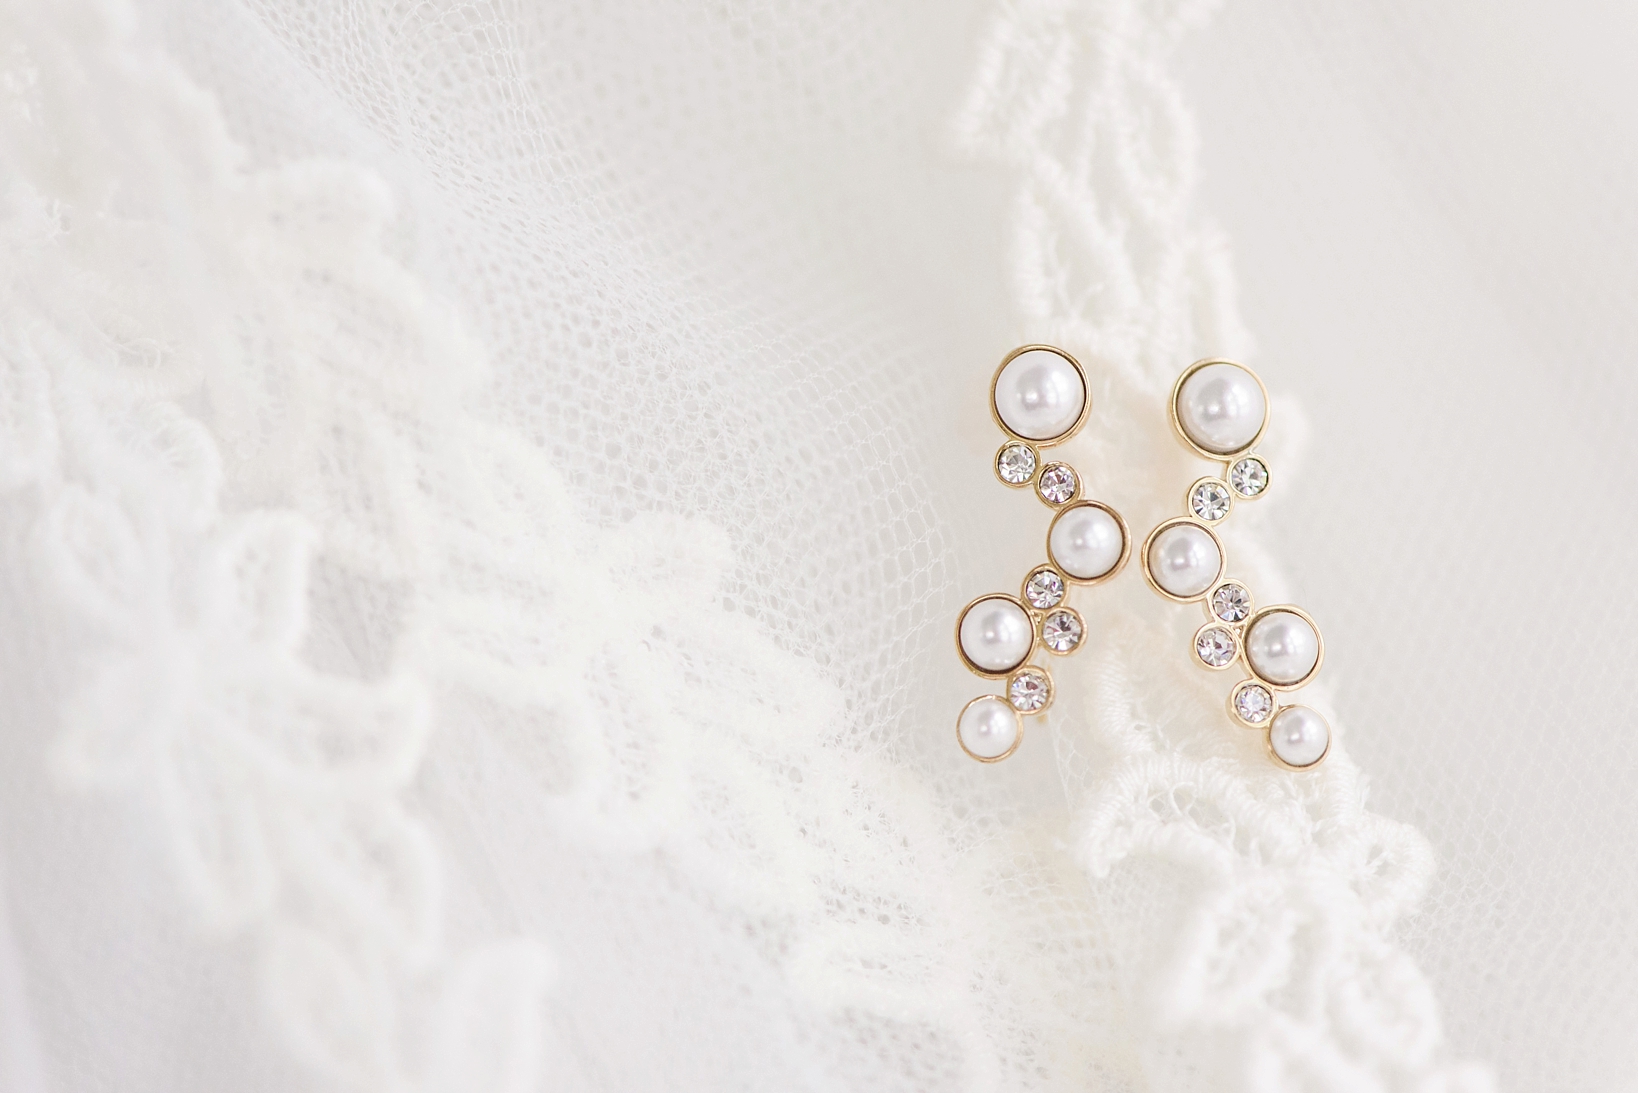 Pearl and Gold earrings against the lace details of the vintage bridal veil